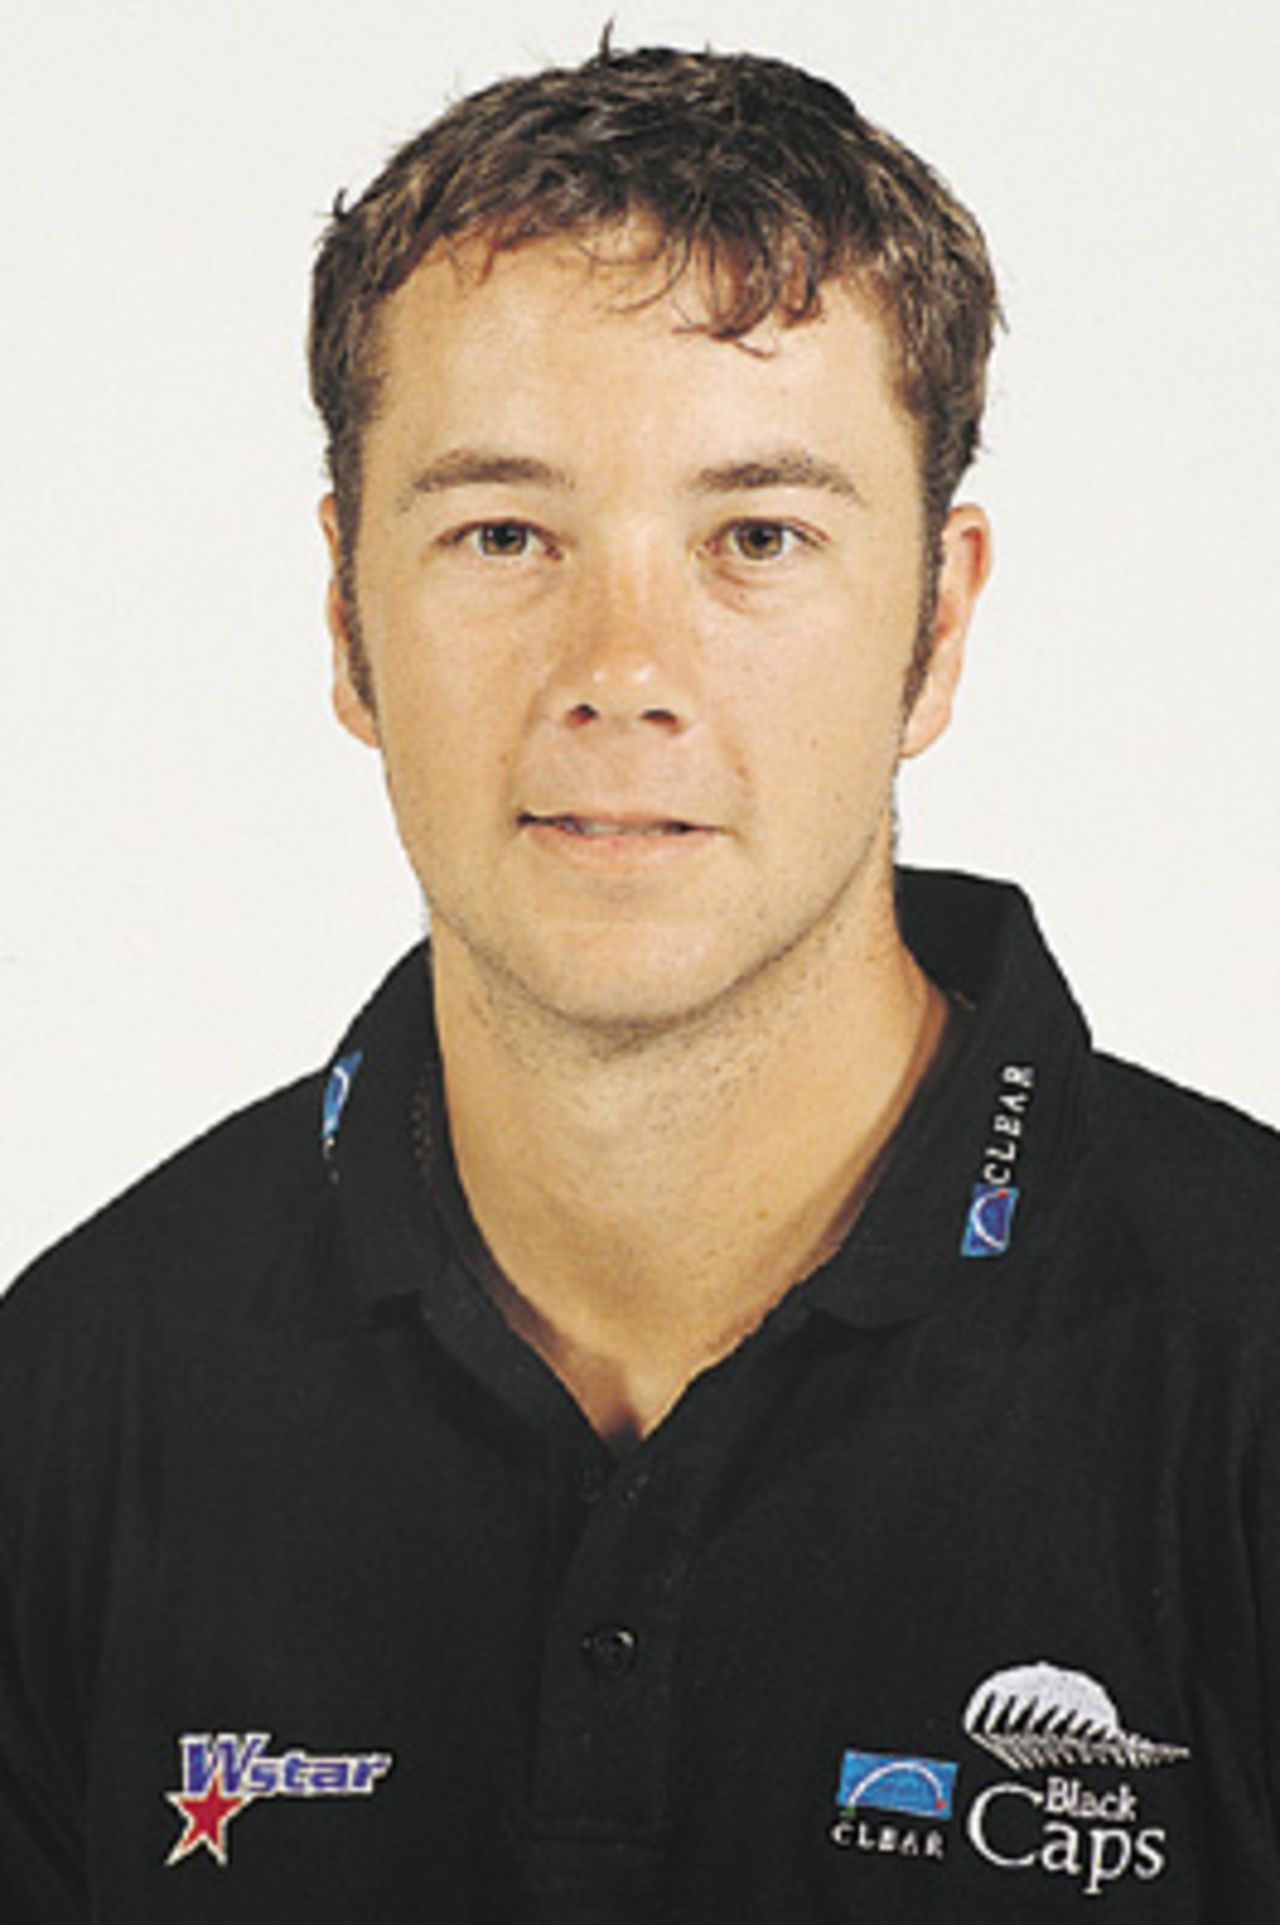 Portrait of Craig McMillan - New Zealand player in the 2000/01 season